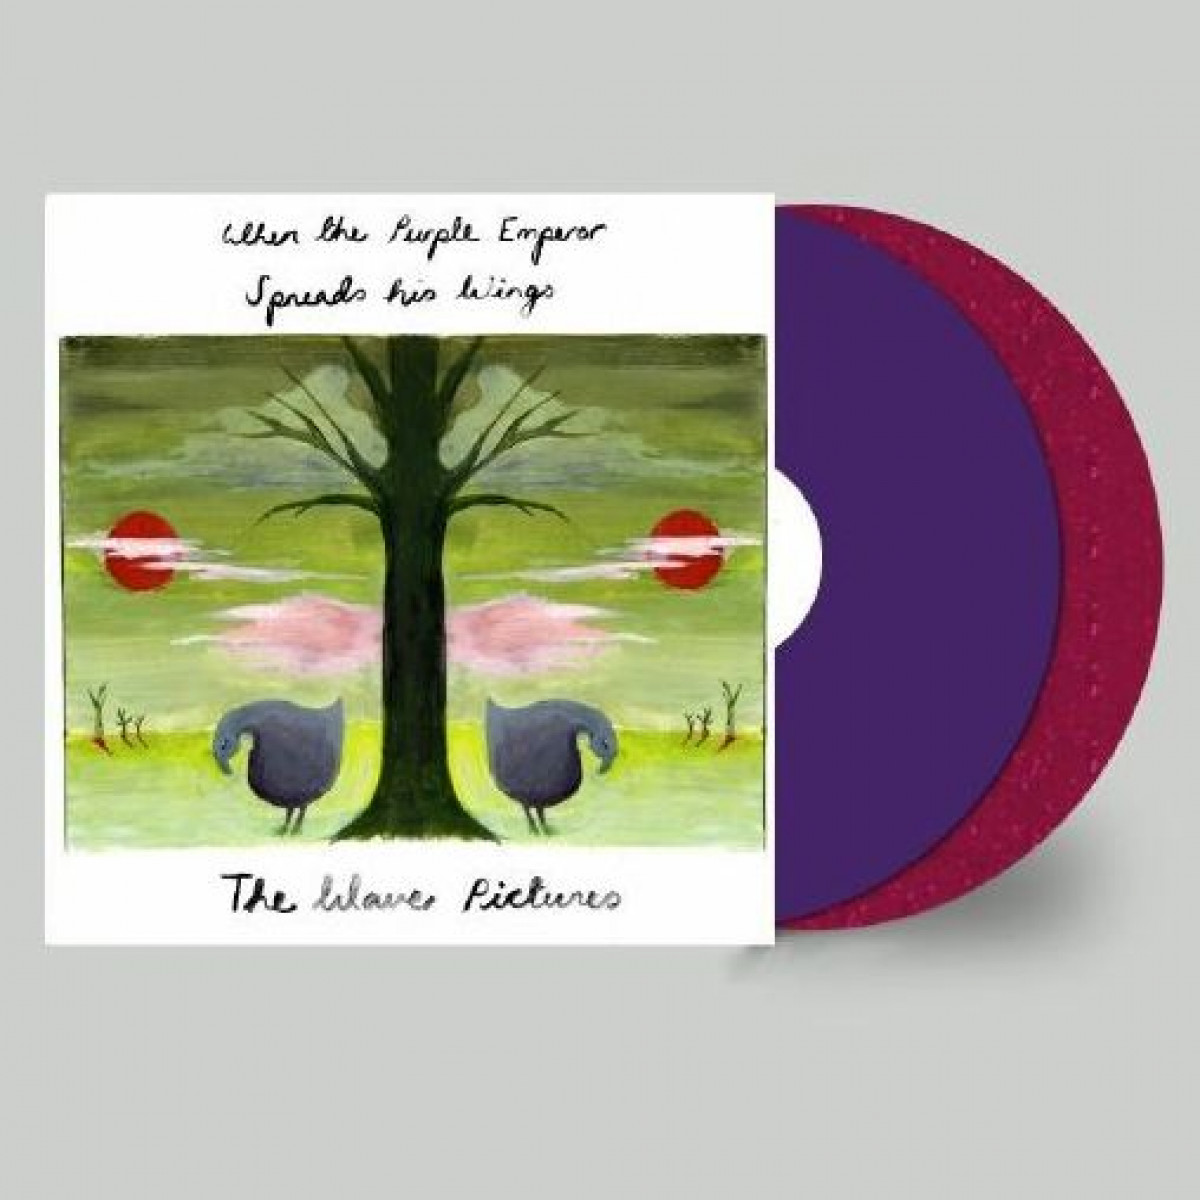 The Wave Pictures "When The Purple Emperor Spreads His Wings" Coloured 2LP